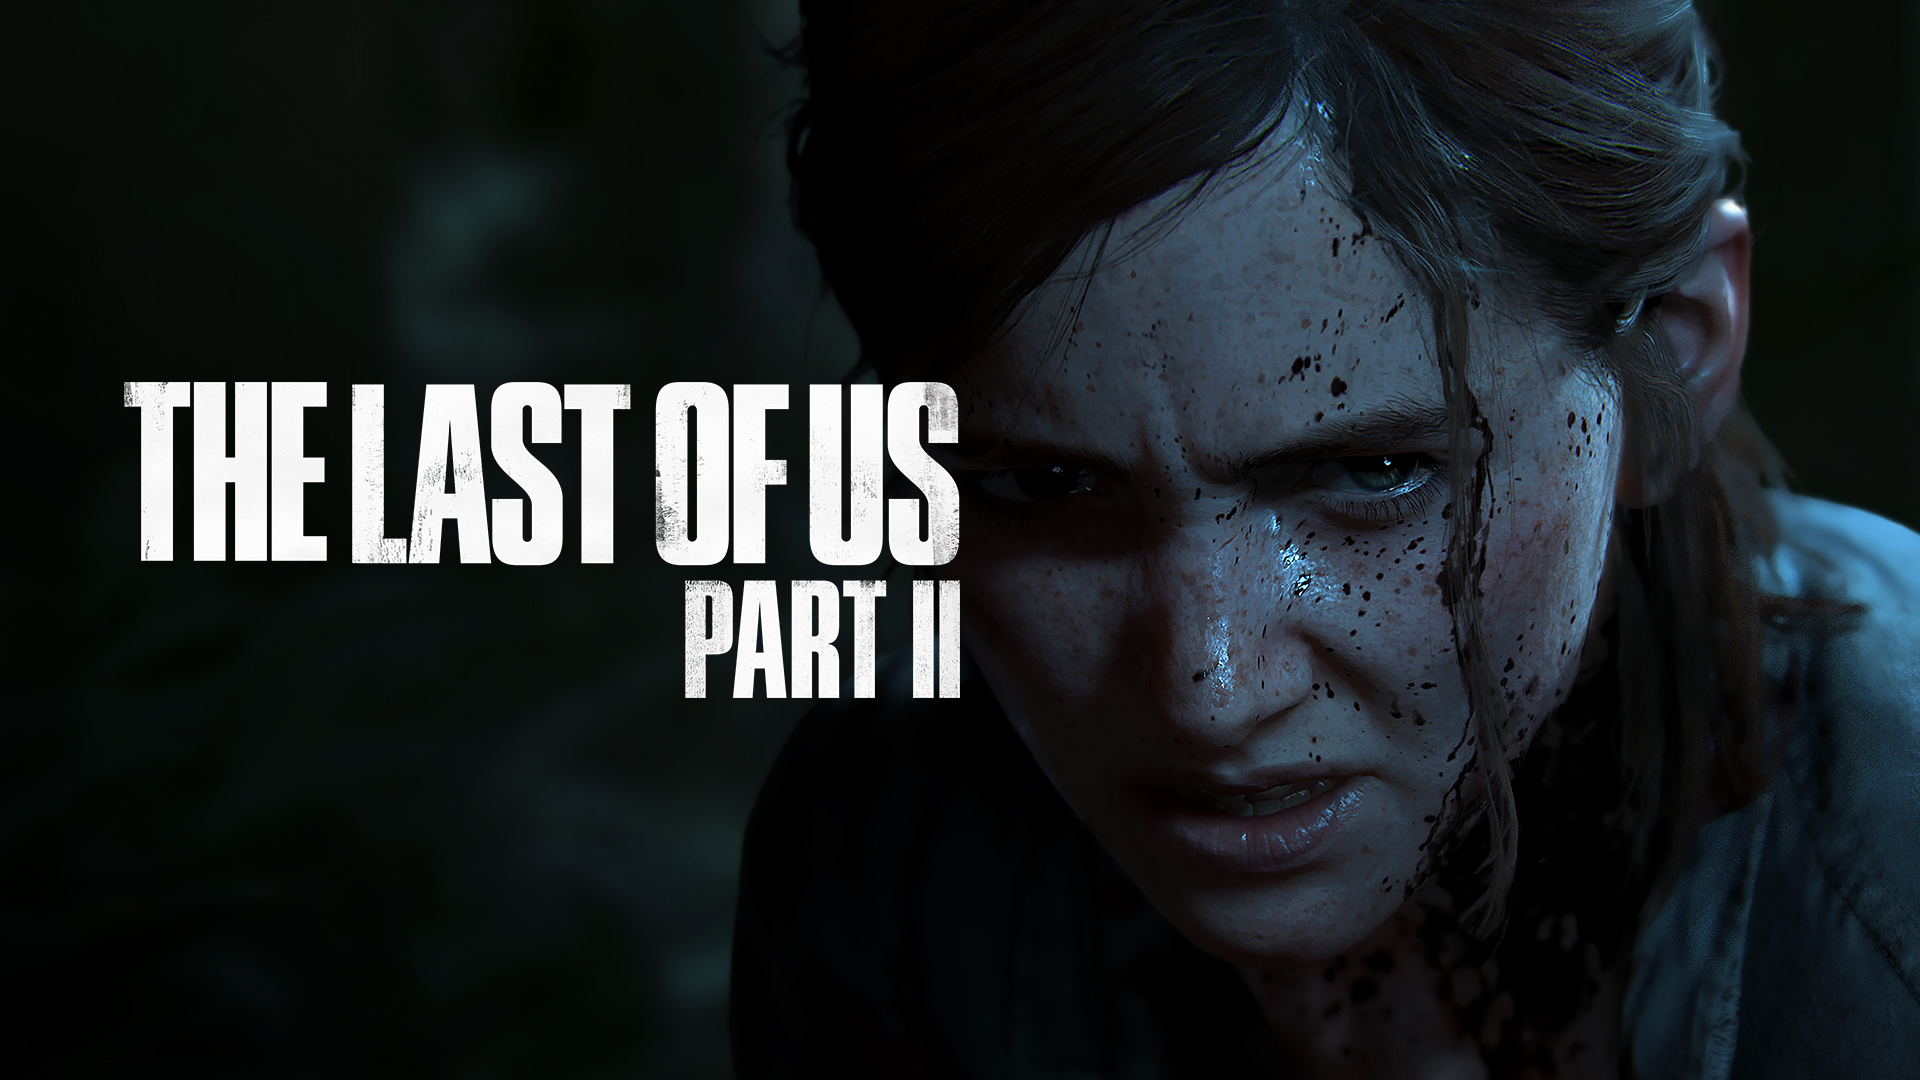 The Last of Us Part II — Naughty Dog / Sony Interactive Entertainment